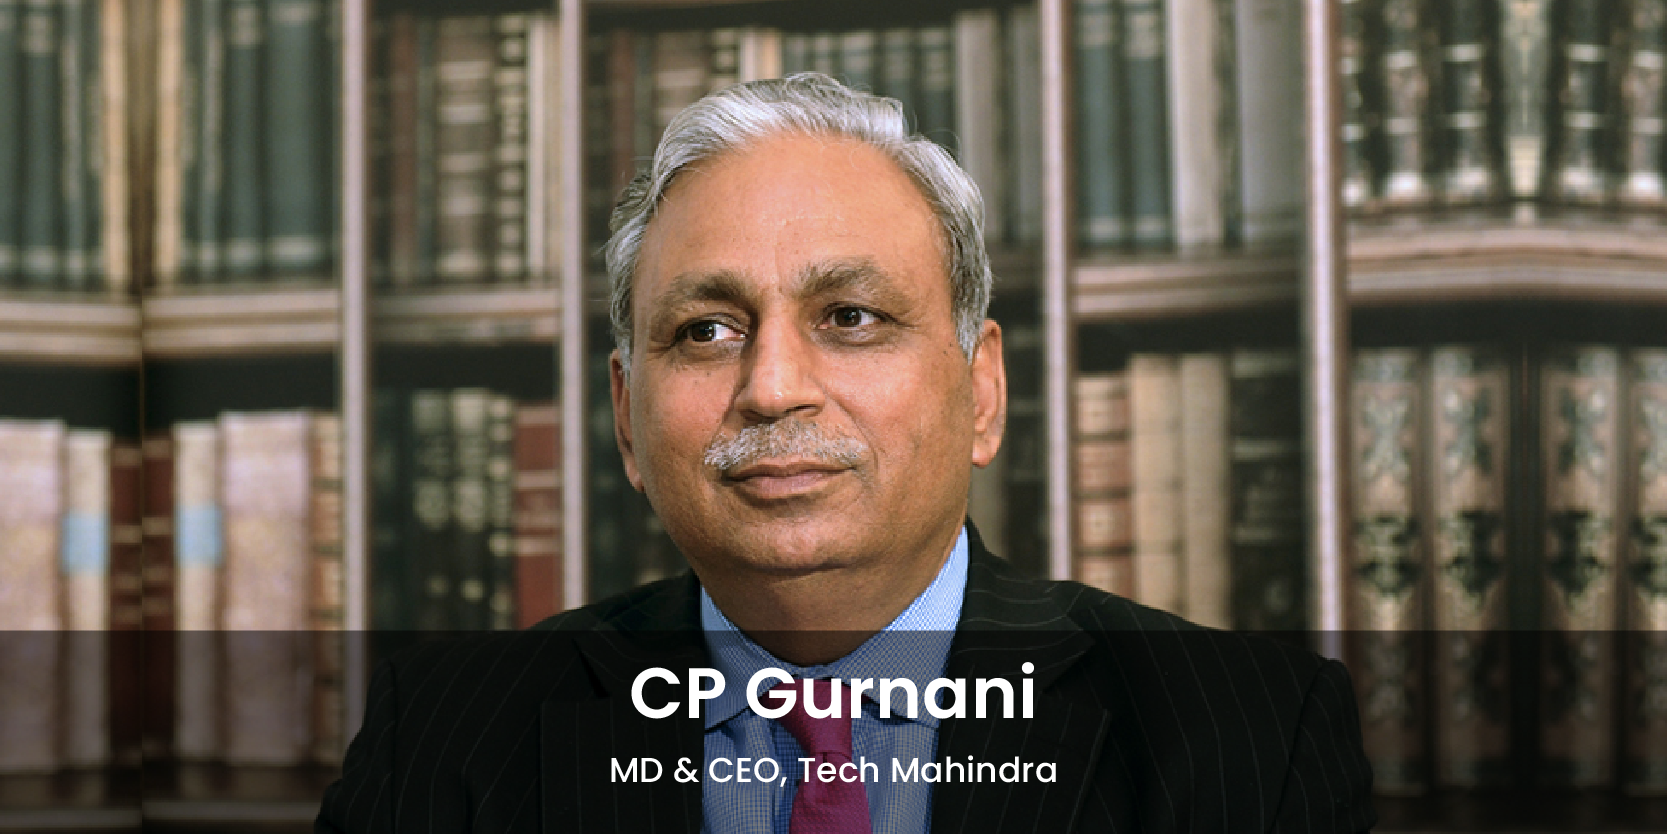 Why Tech Mahindra is buying growth engines for the future